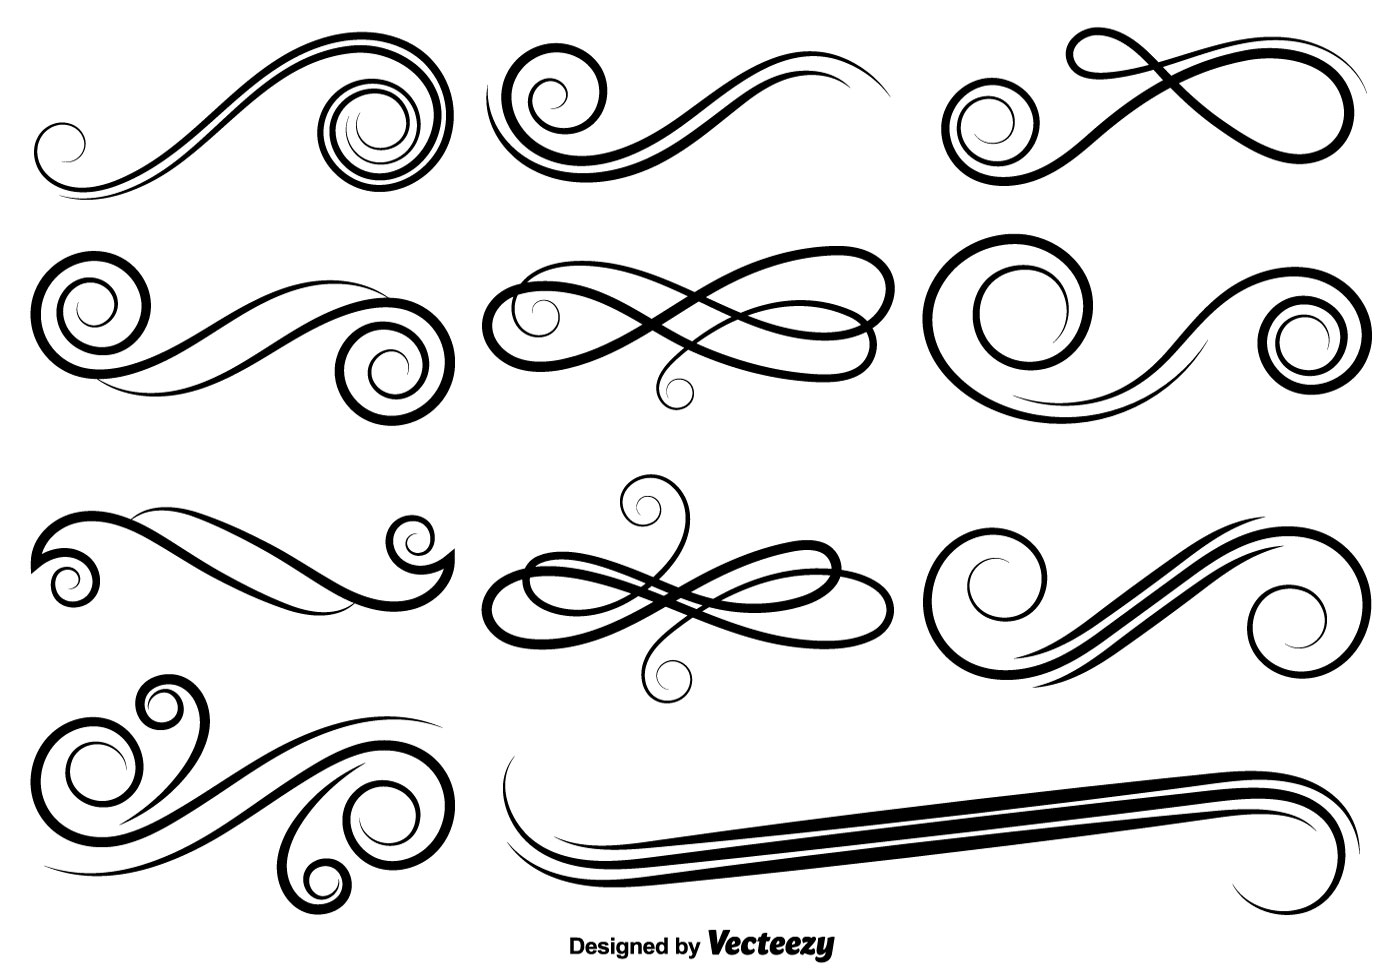 Calligraphy Flourish Vector At GetDrawings Free Download.